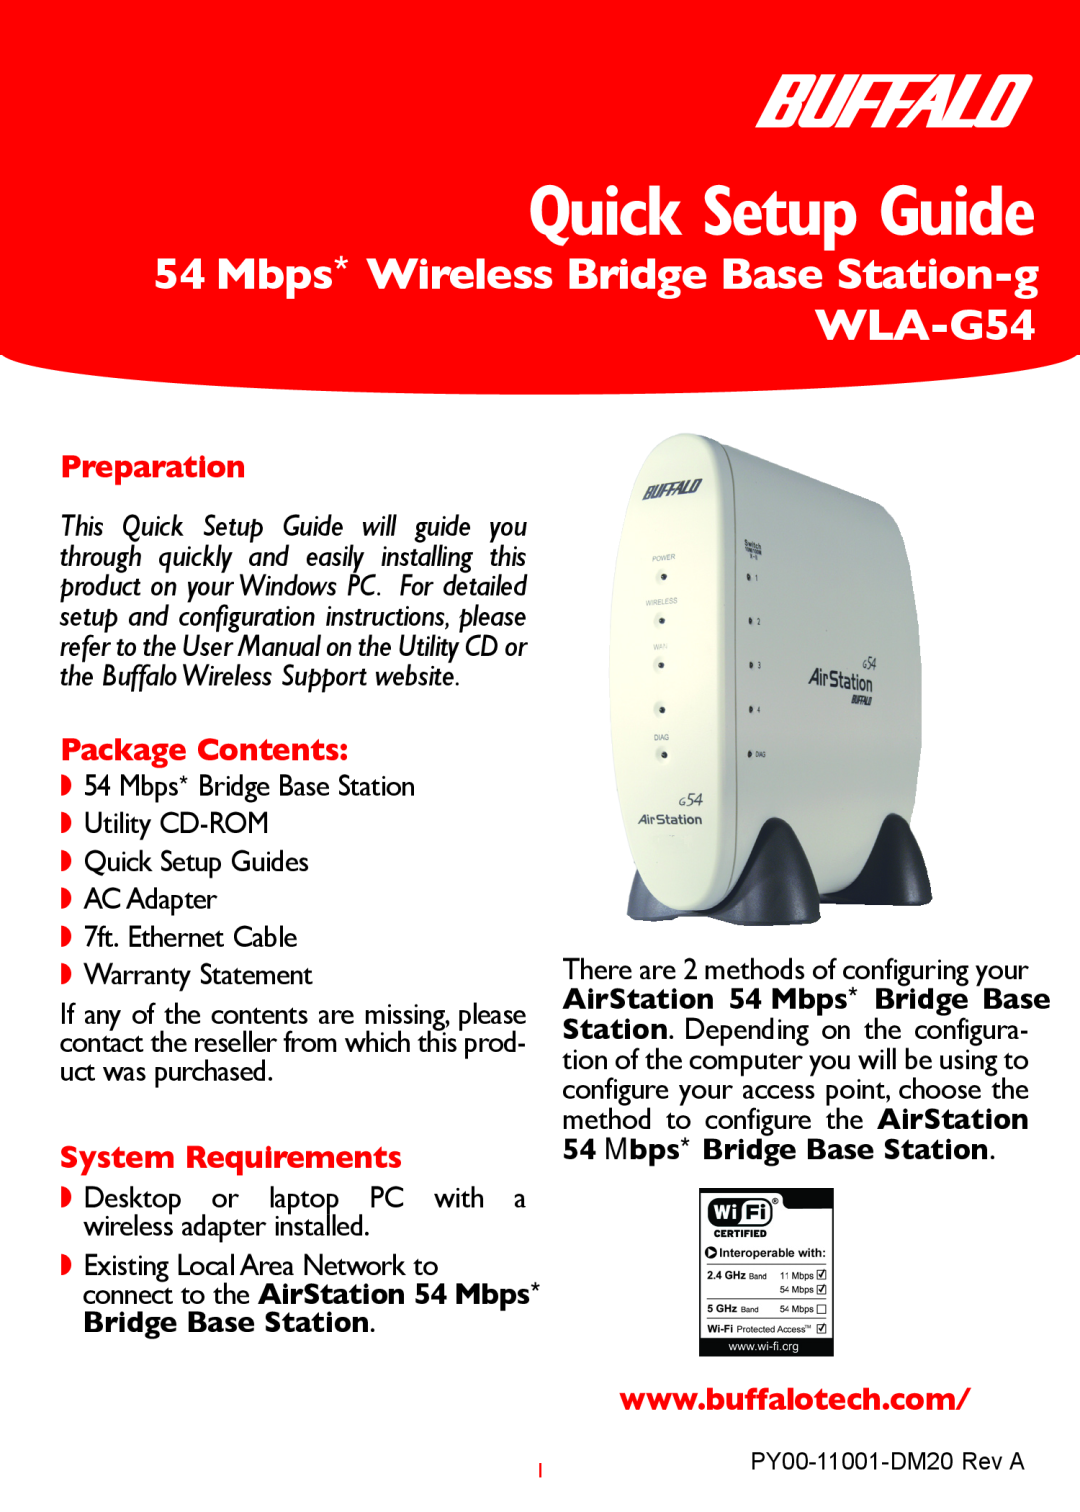 Buffalo Technology WLA-G54 setup guide Preparation, Package Contents, System Requirements, Quick Setup Guide 